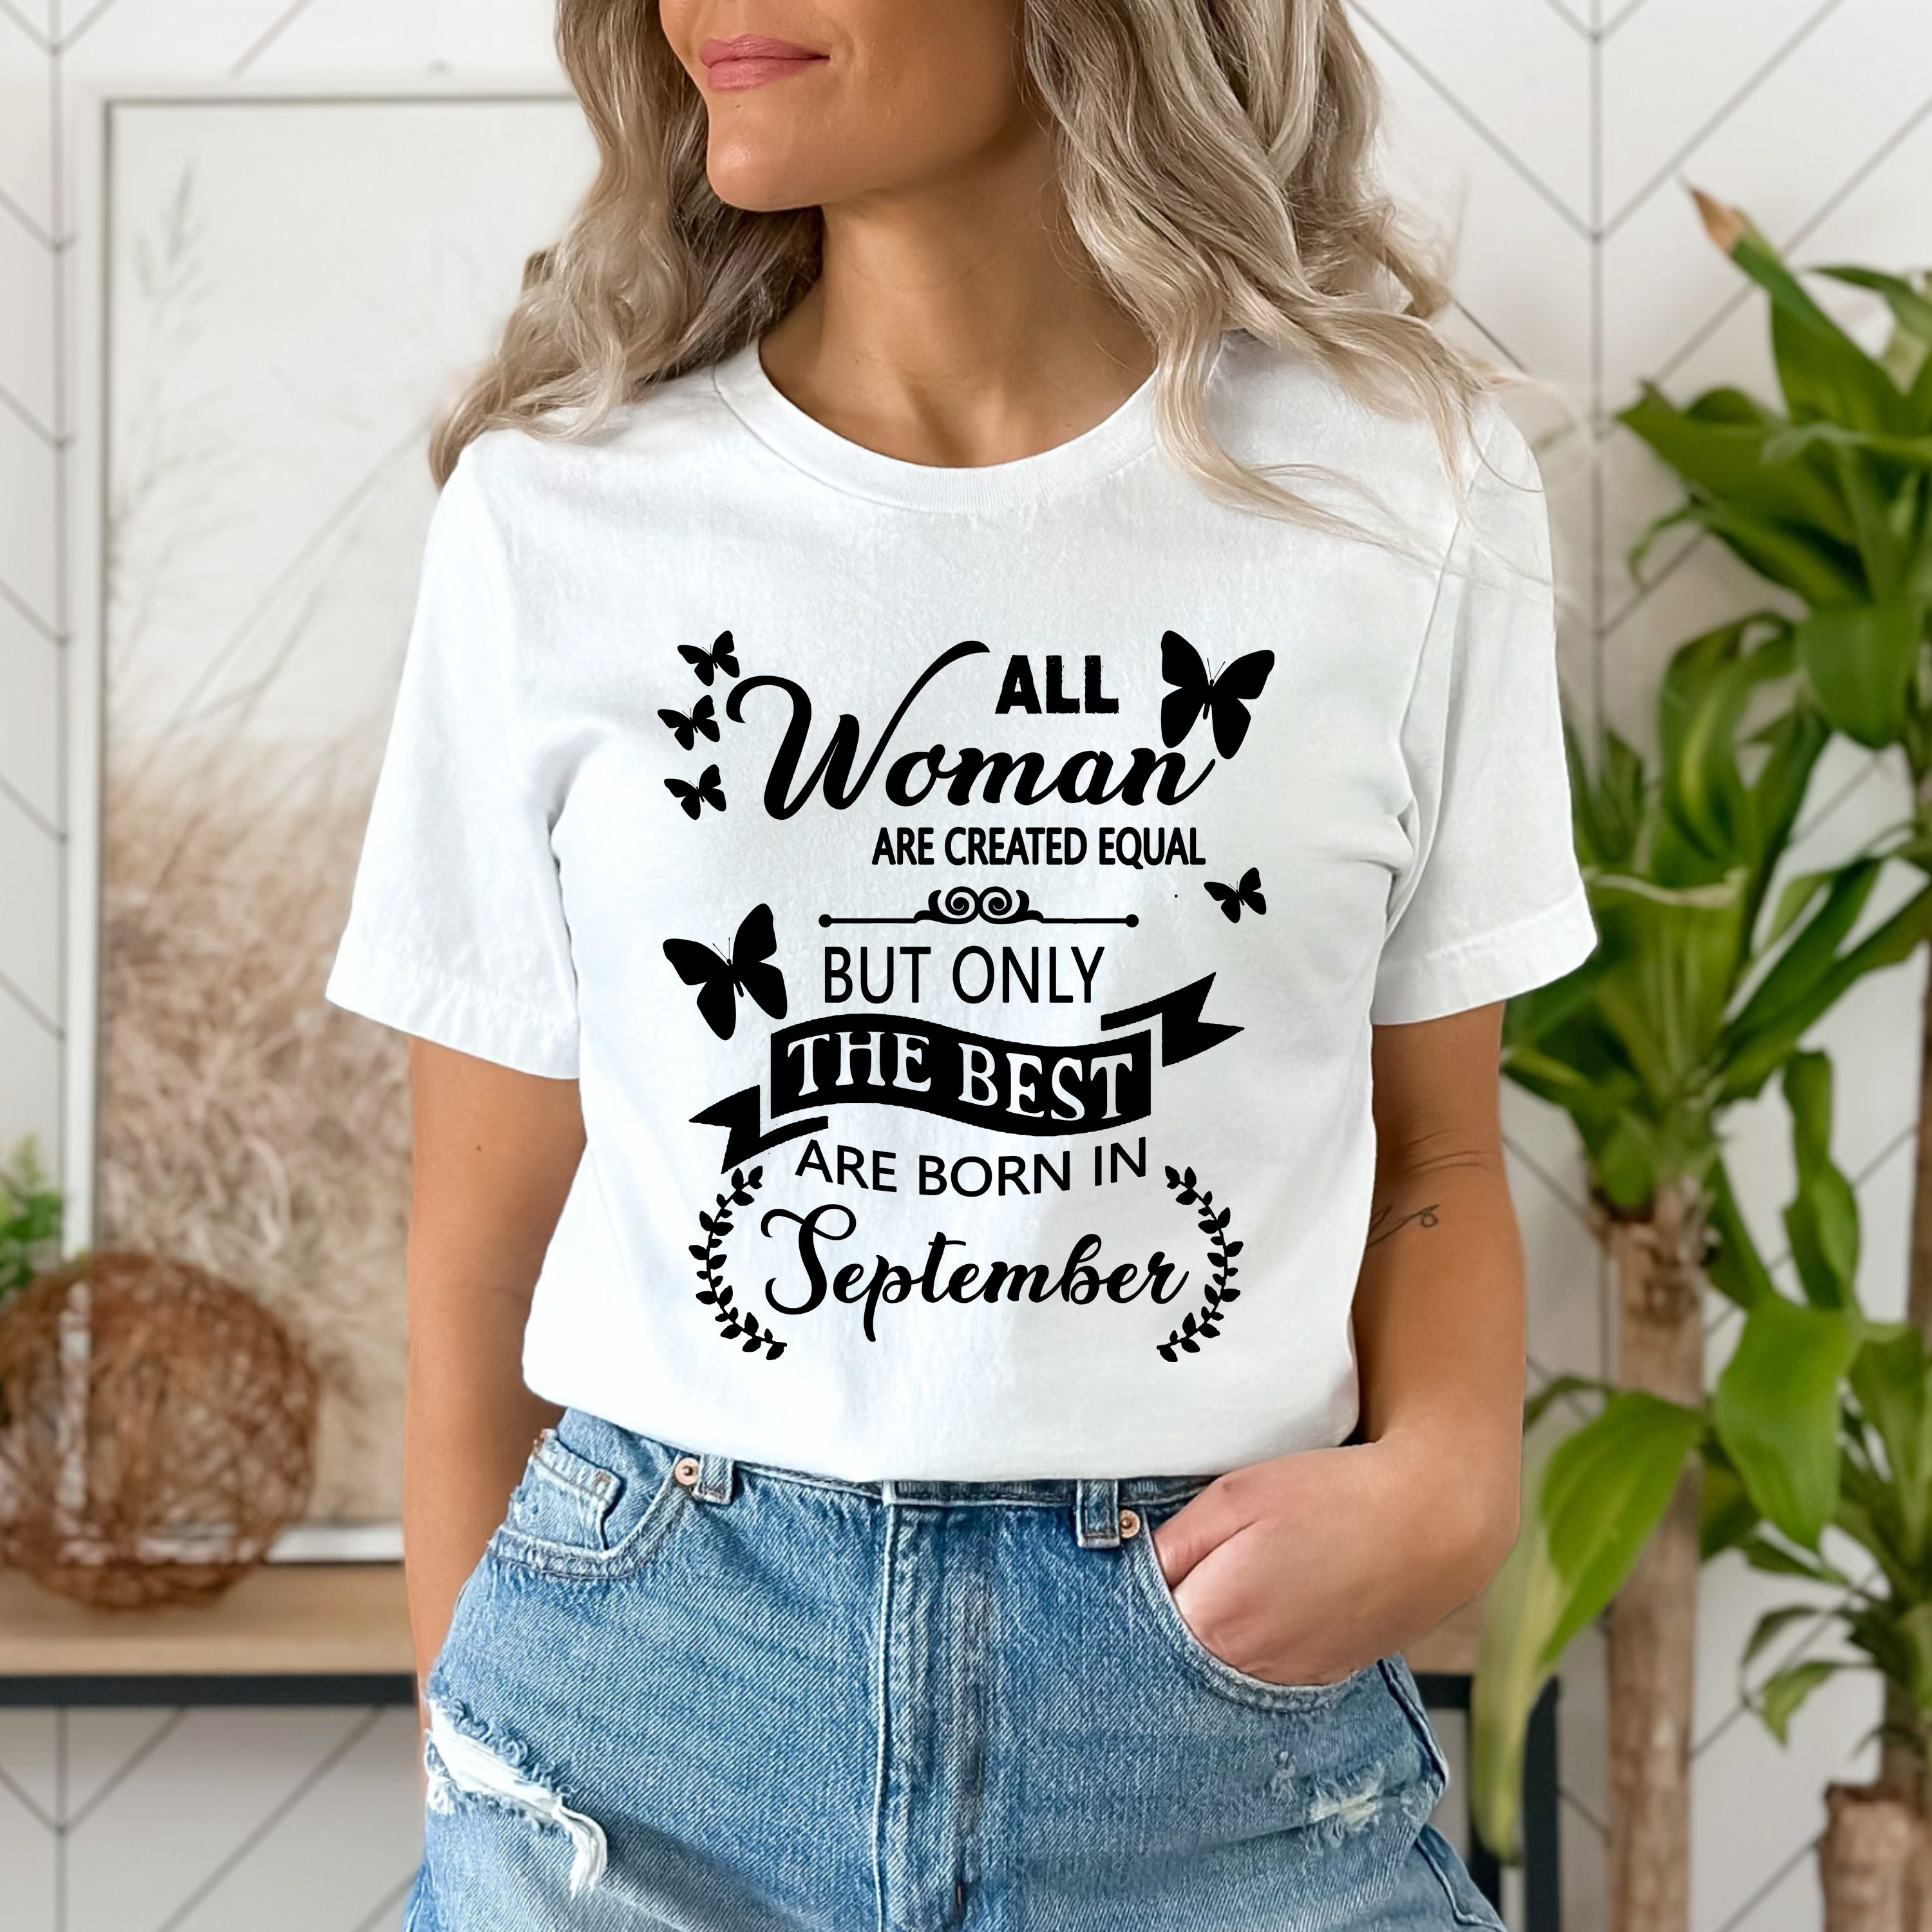 "All Woman Are Created Equal But The Best Are Born in September".